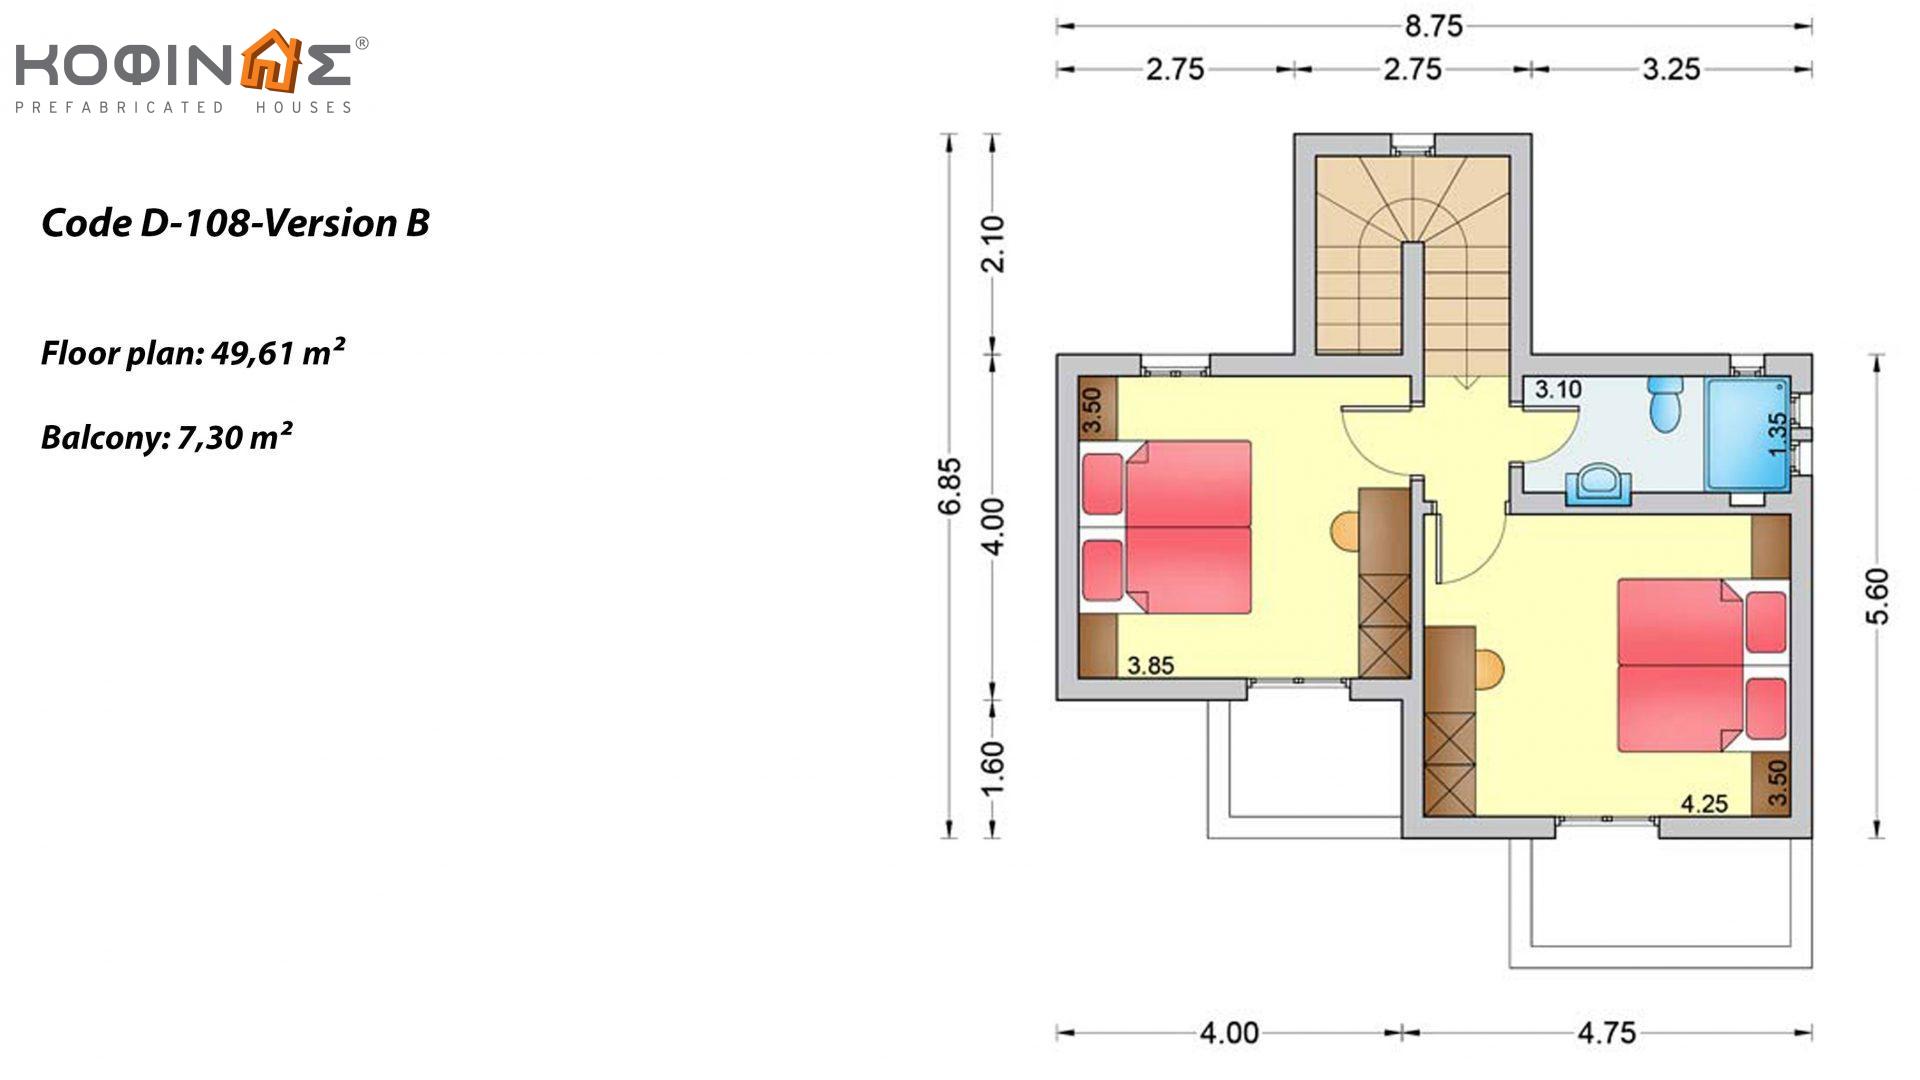 2-story house D-108, total surface of 108,07 m²,covered roofed areas 19.55 m²,balconies 7.30 m²